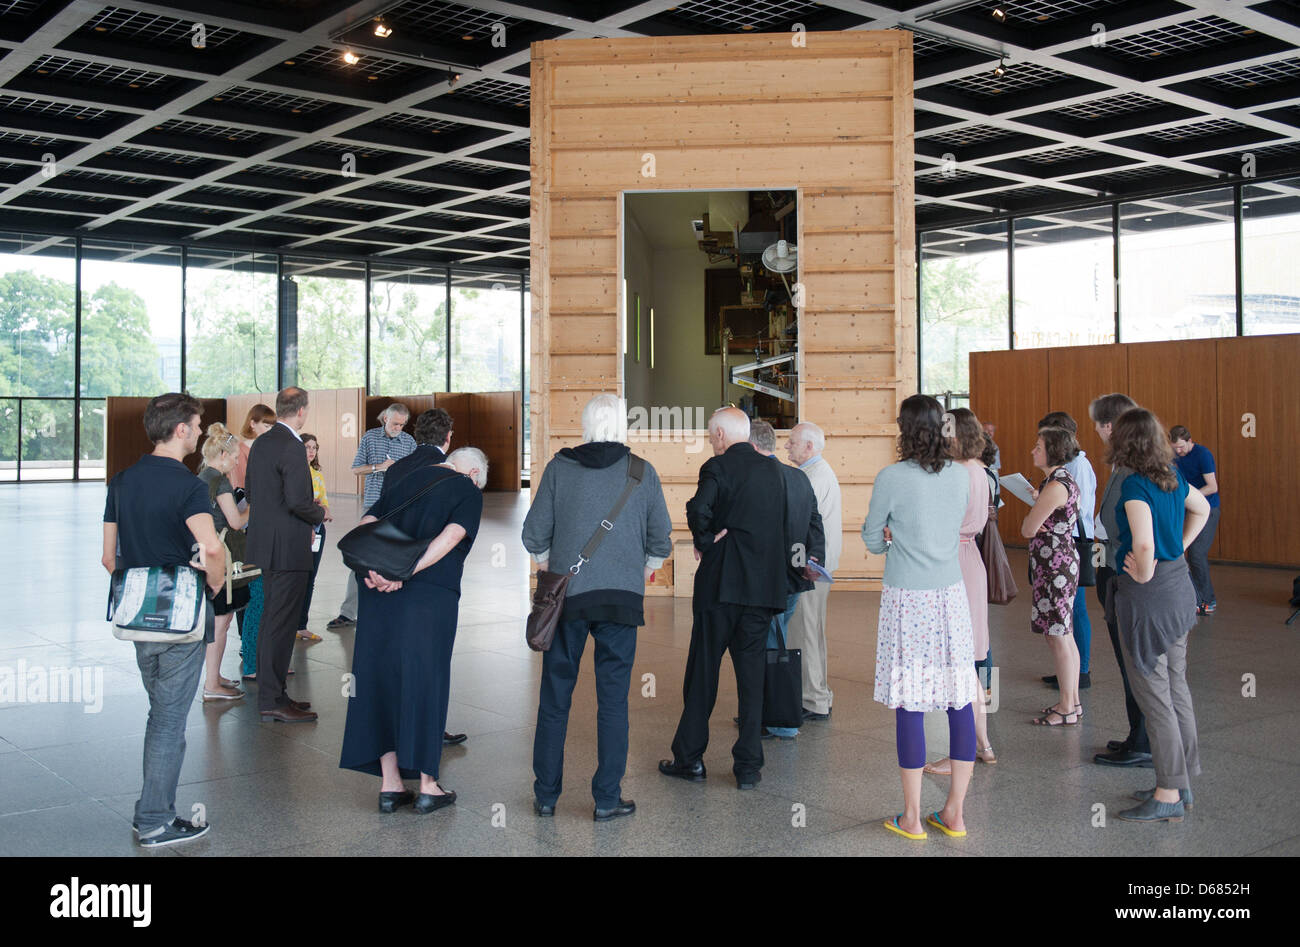 The work 'The Box' of US artist Paul McCarthy is featured at the Neue Nationalgalerie (New National Gallery) in Berlin, Germany, 05 July 2012. His work will be presented at the venue until 04 November 2012. Photo: Maurizio Gambarini Stock Photo